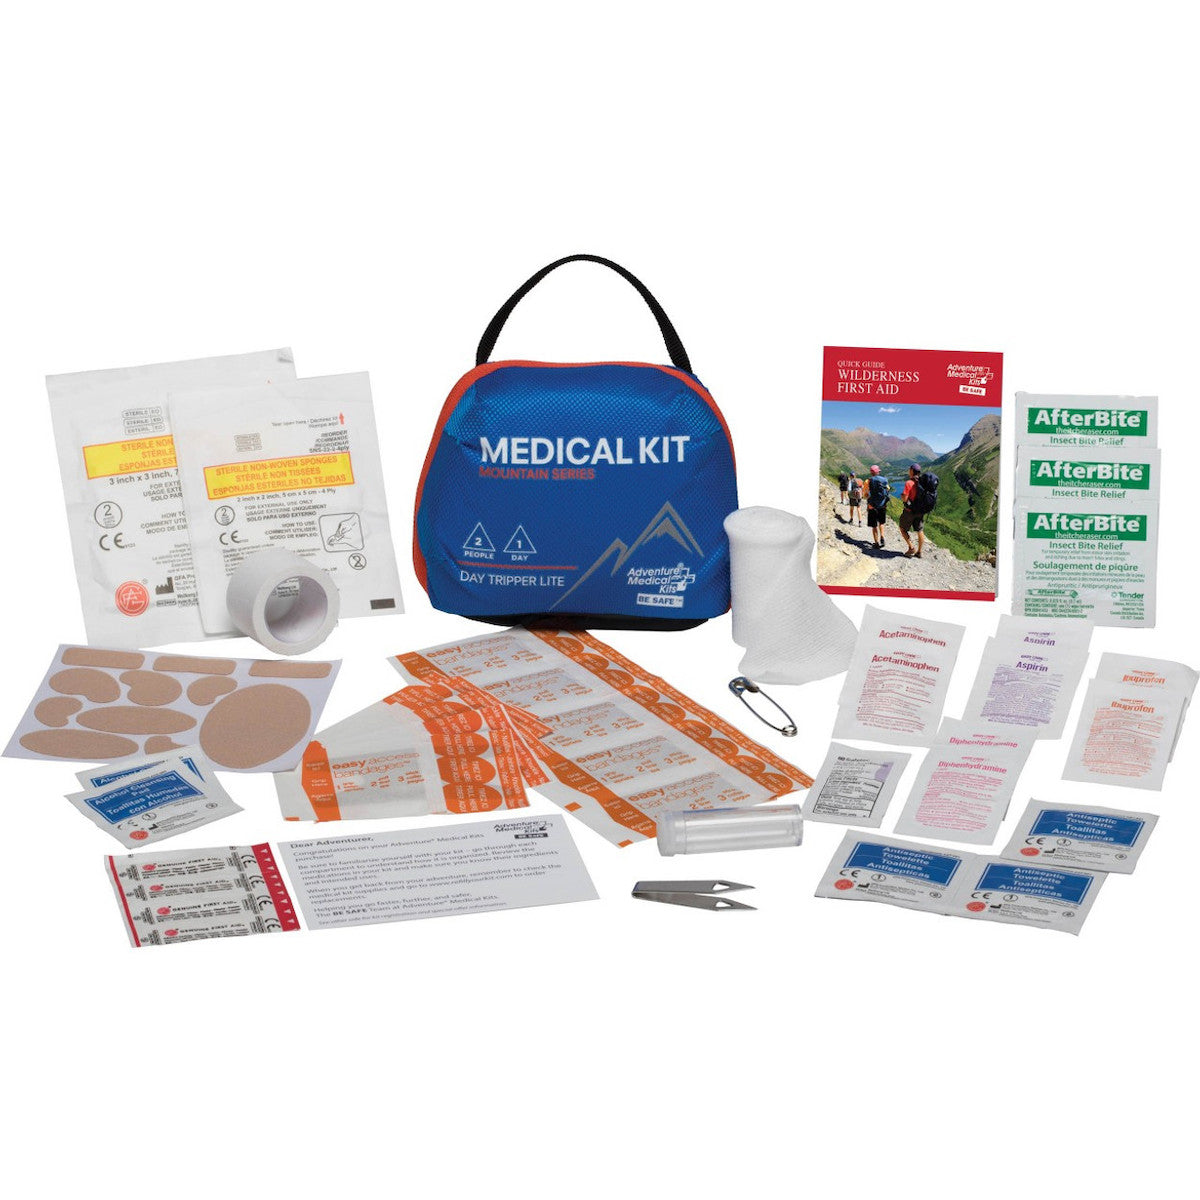 Adventure Medical First Aid Kit - Day Tripper Lite First Aid Kit